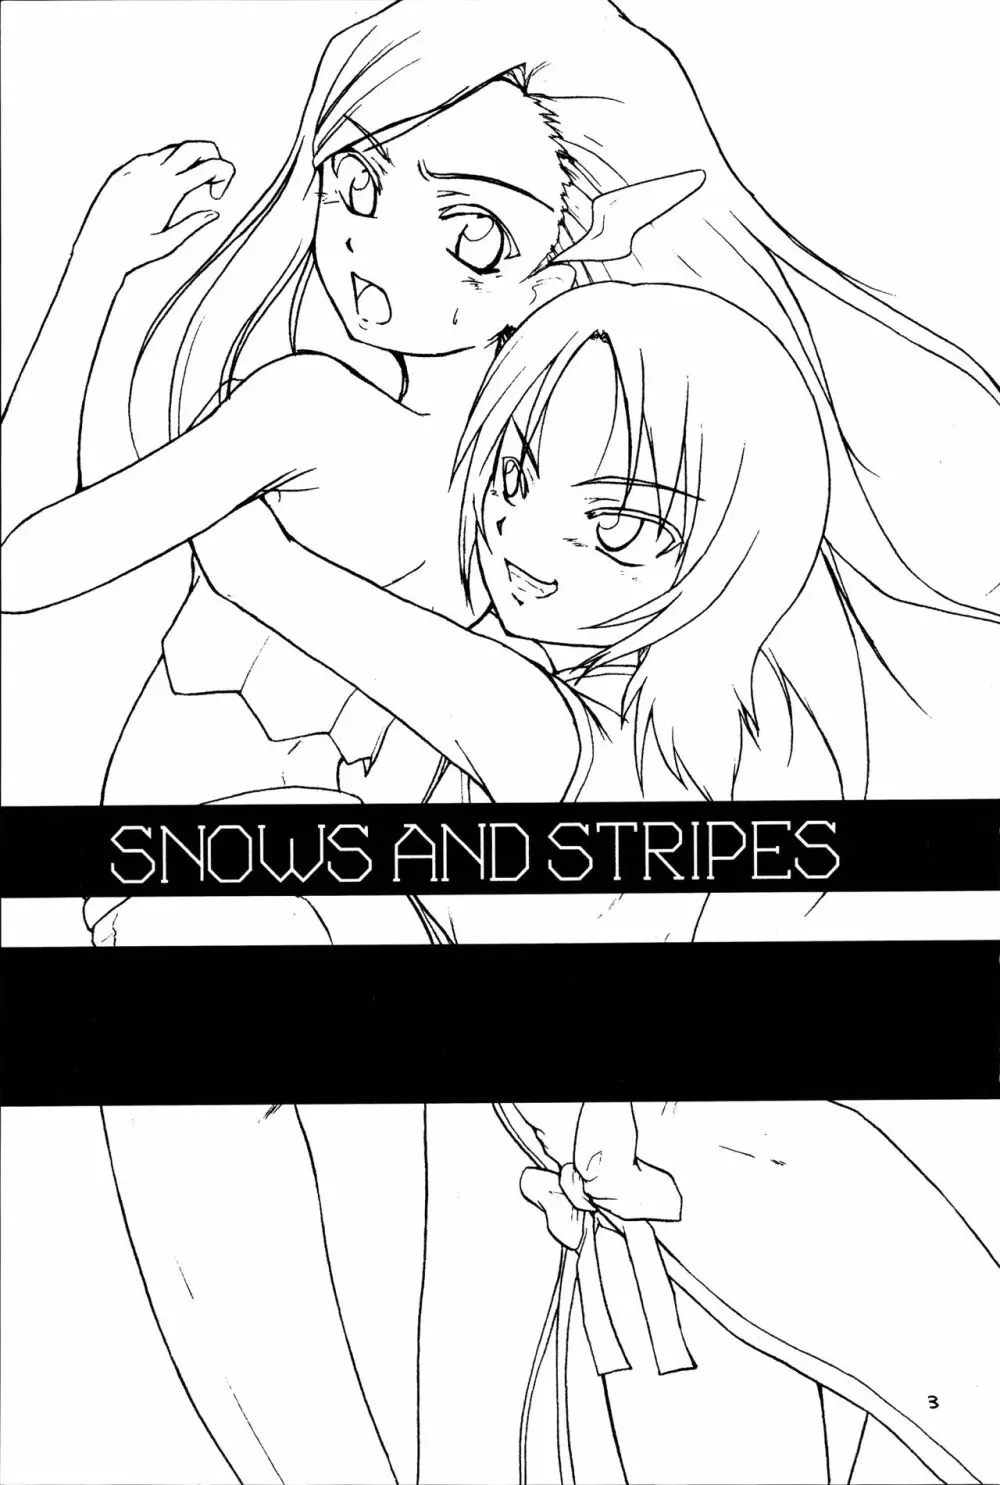 Snows and Stripes - page2